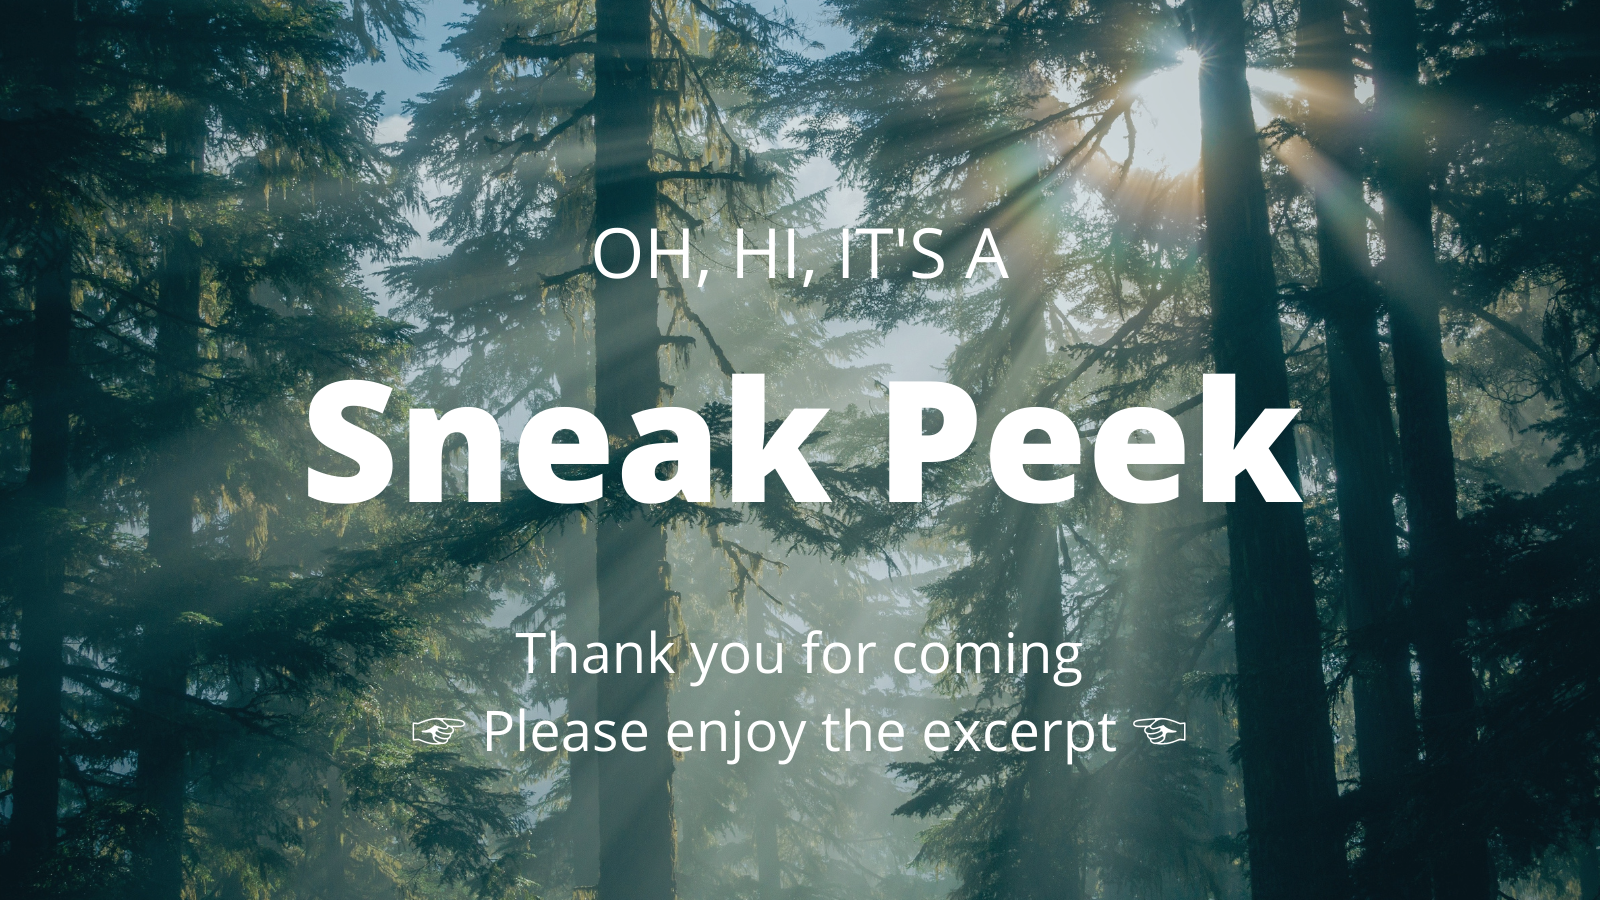 Sunlight filtering through tall trees; caption: Oh, hi, it's a sneak peek Thank you for coming Please enjoy the excerpt